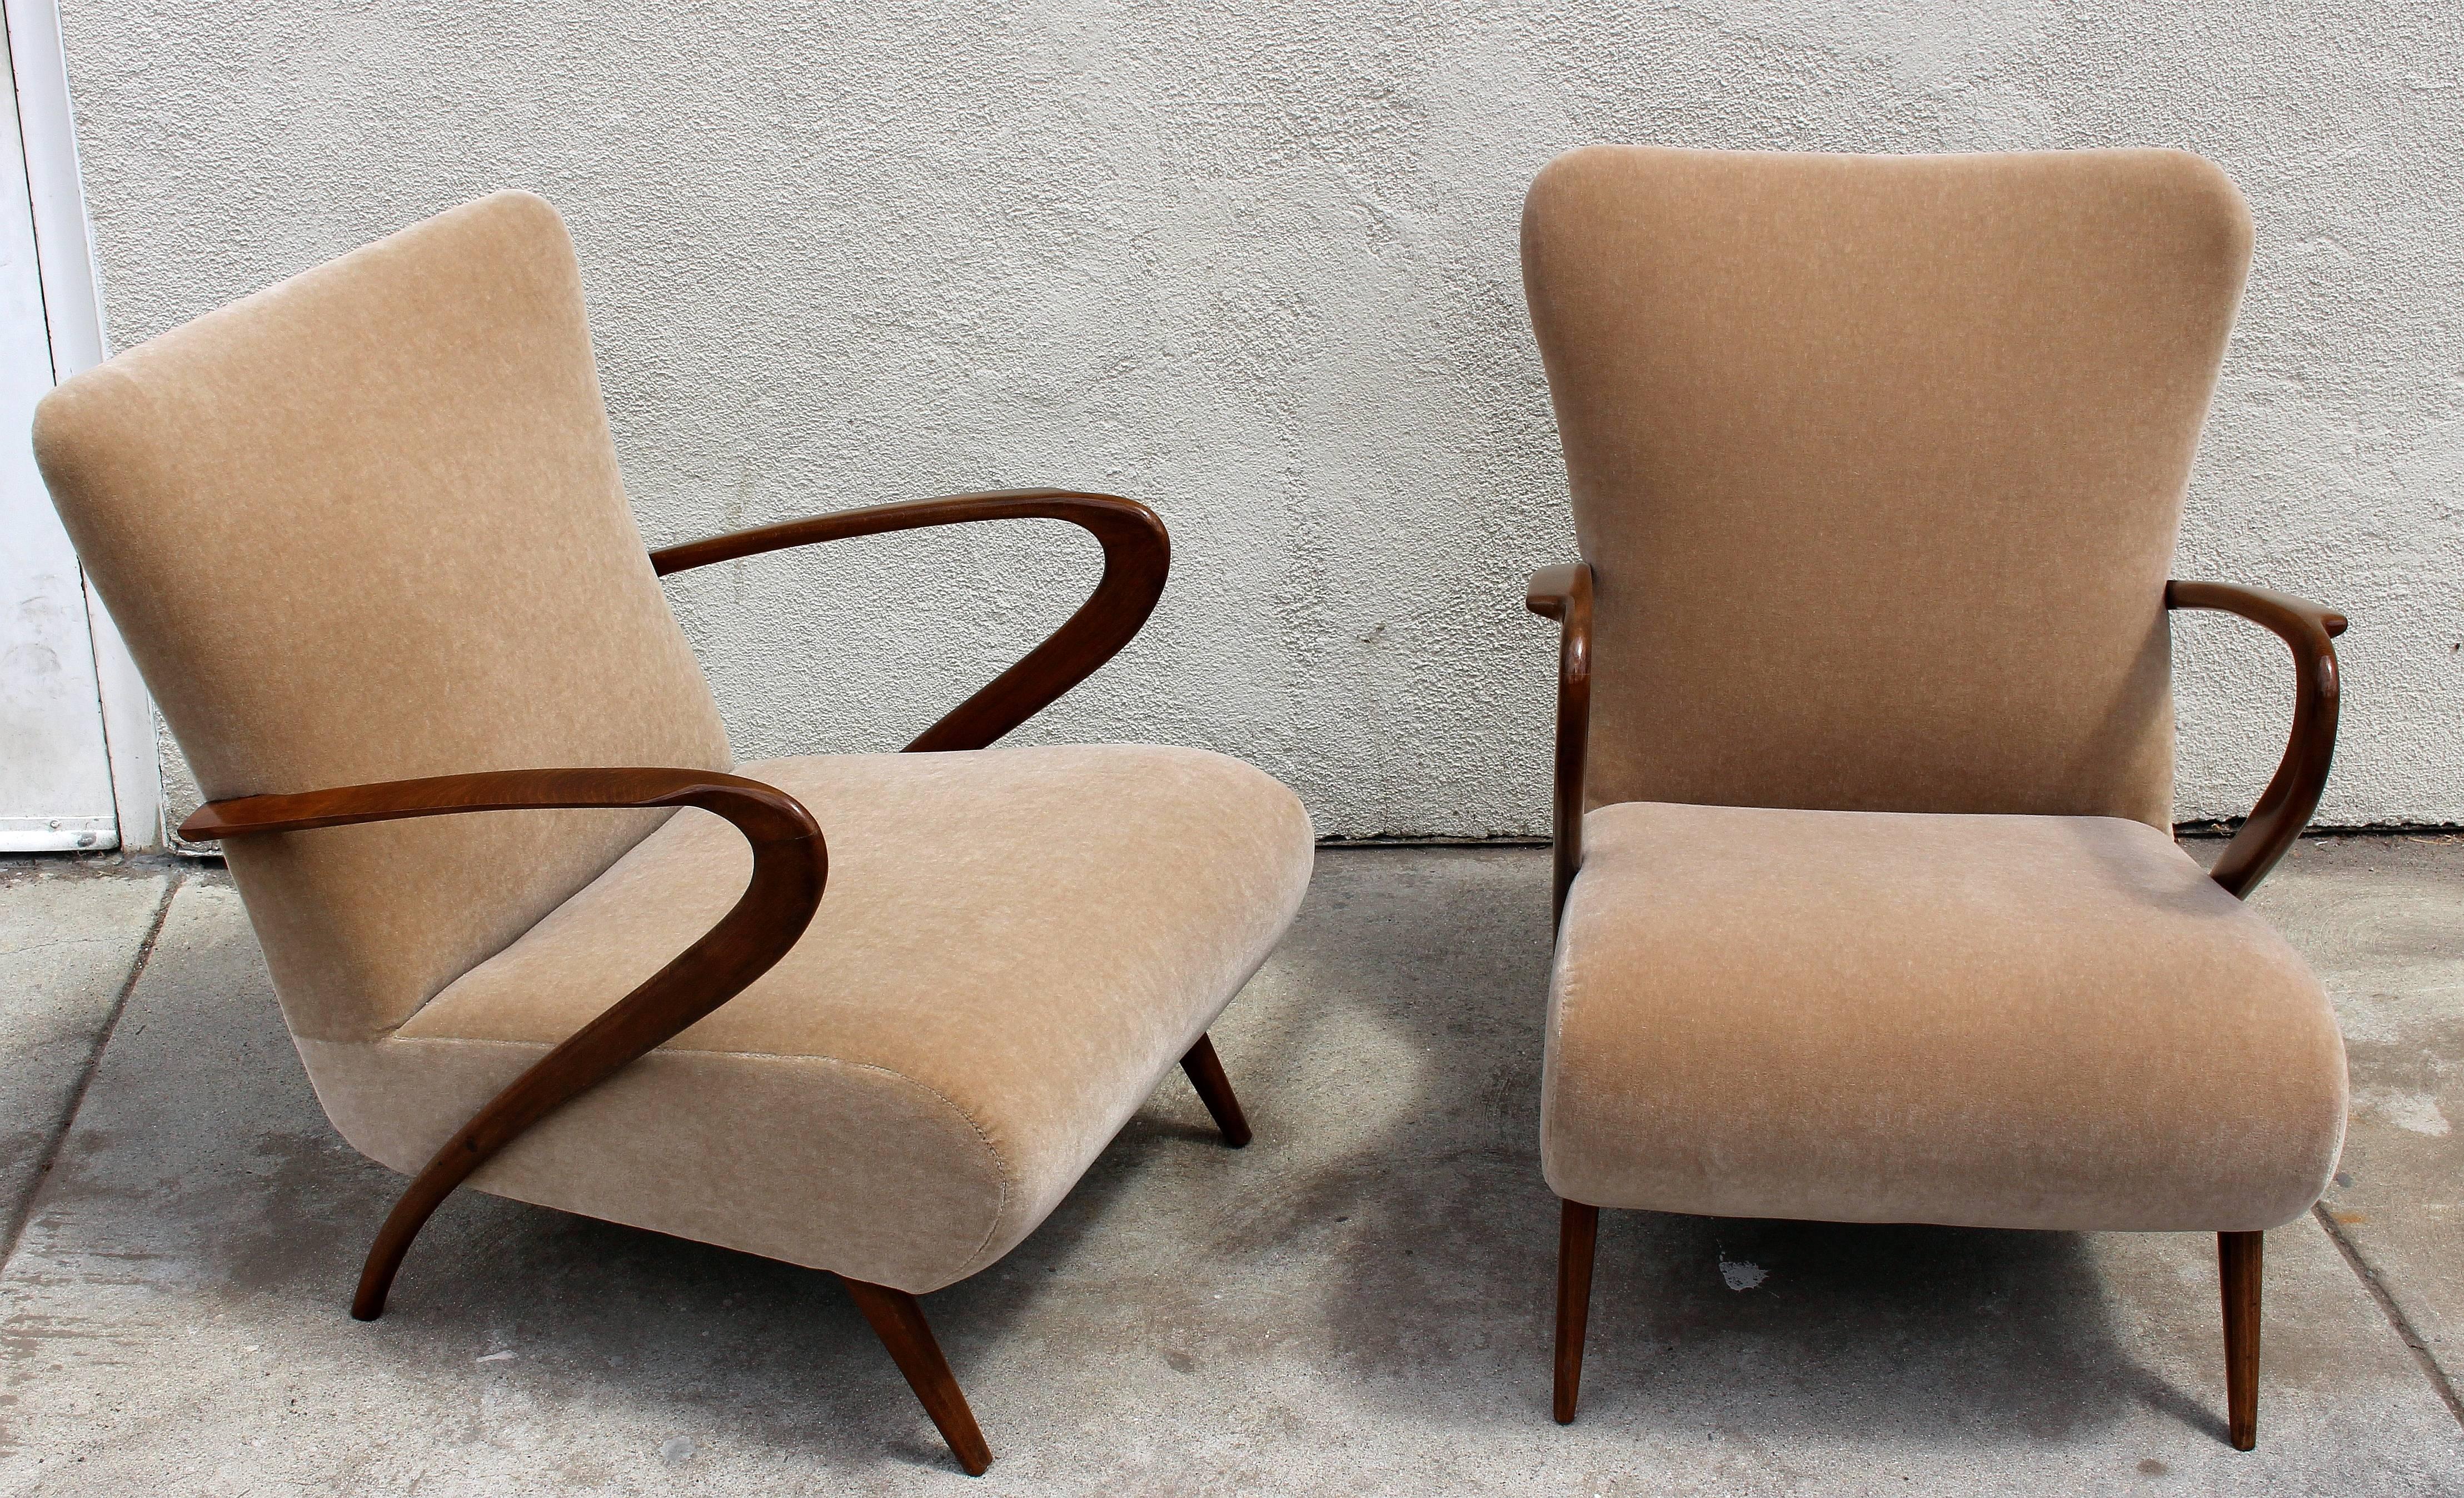 1950s Italian pair of chairs, refurbish and reupholstered in caffee late Mohair upholstery.